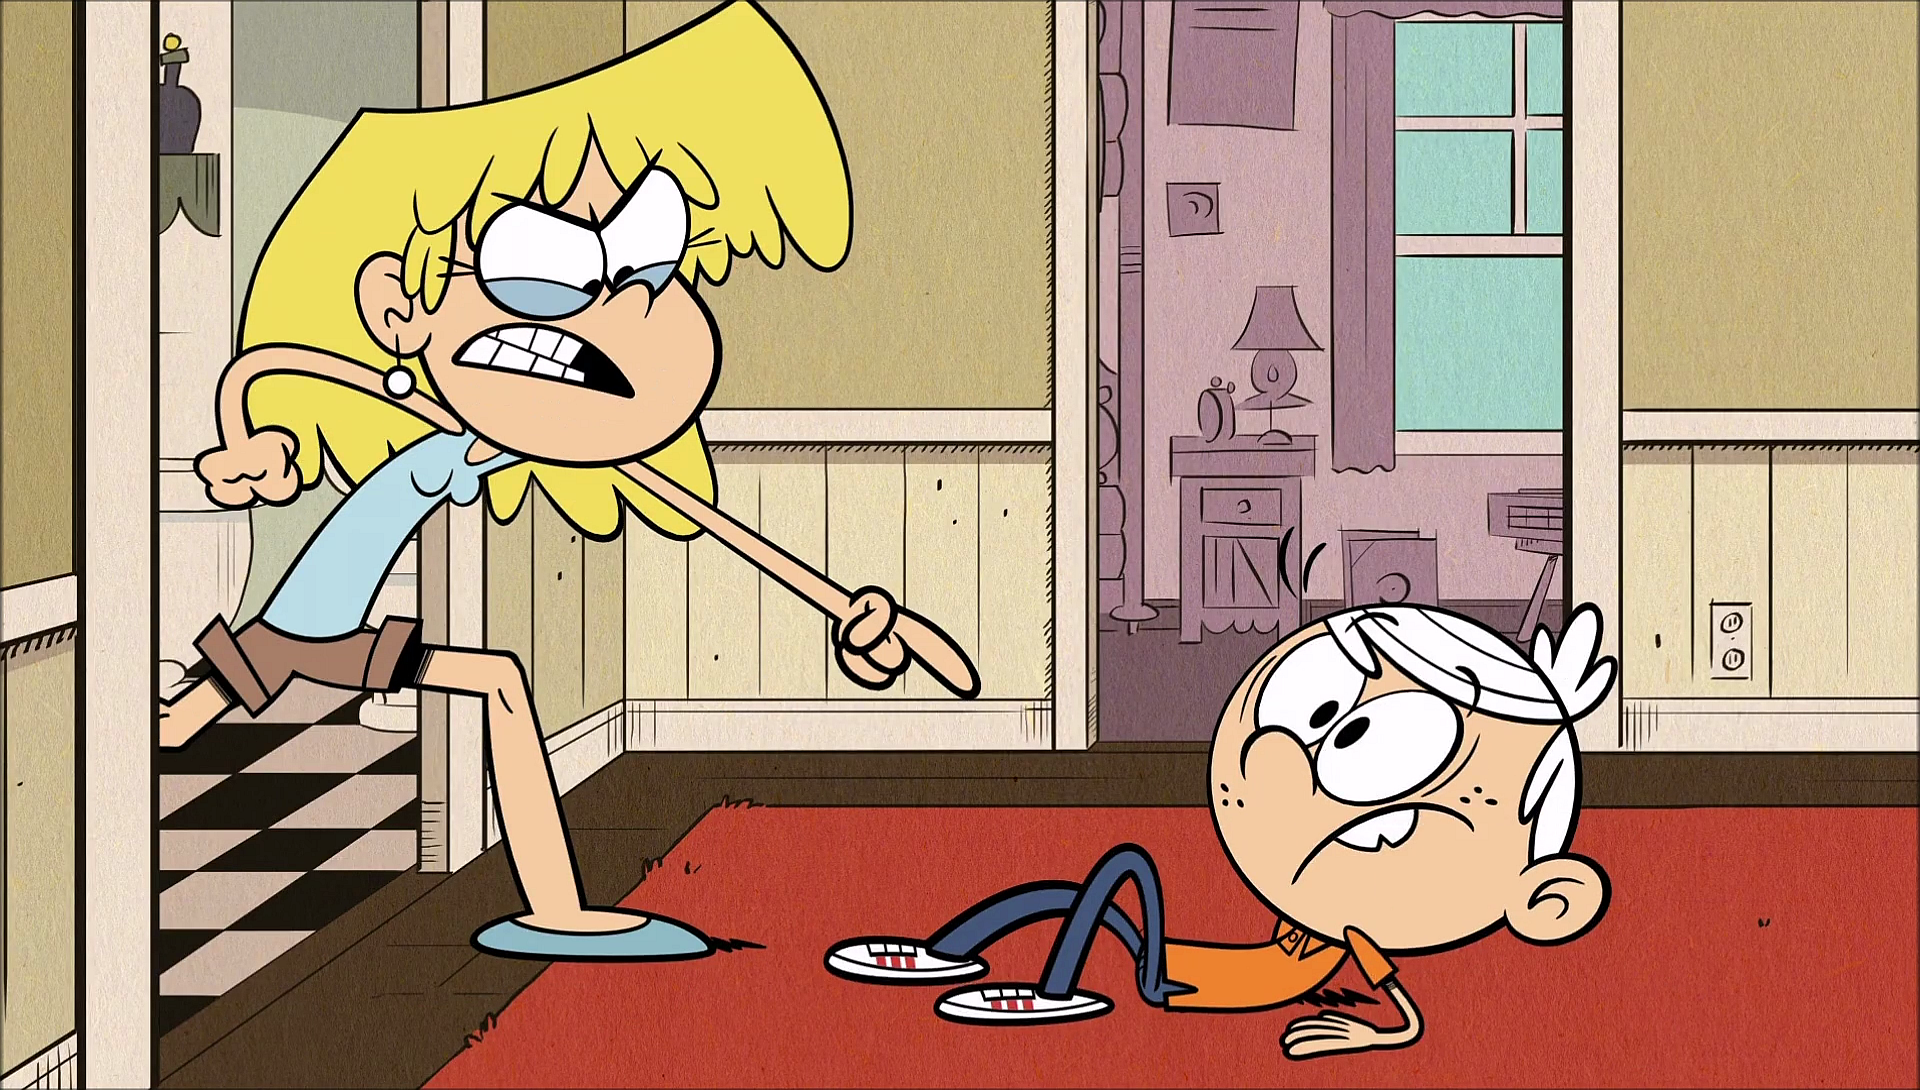 DVD Review: The Loud House Season 1 DVDs (Welcome to the Loud House and I.....